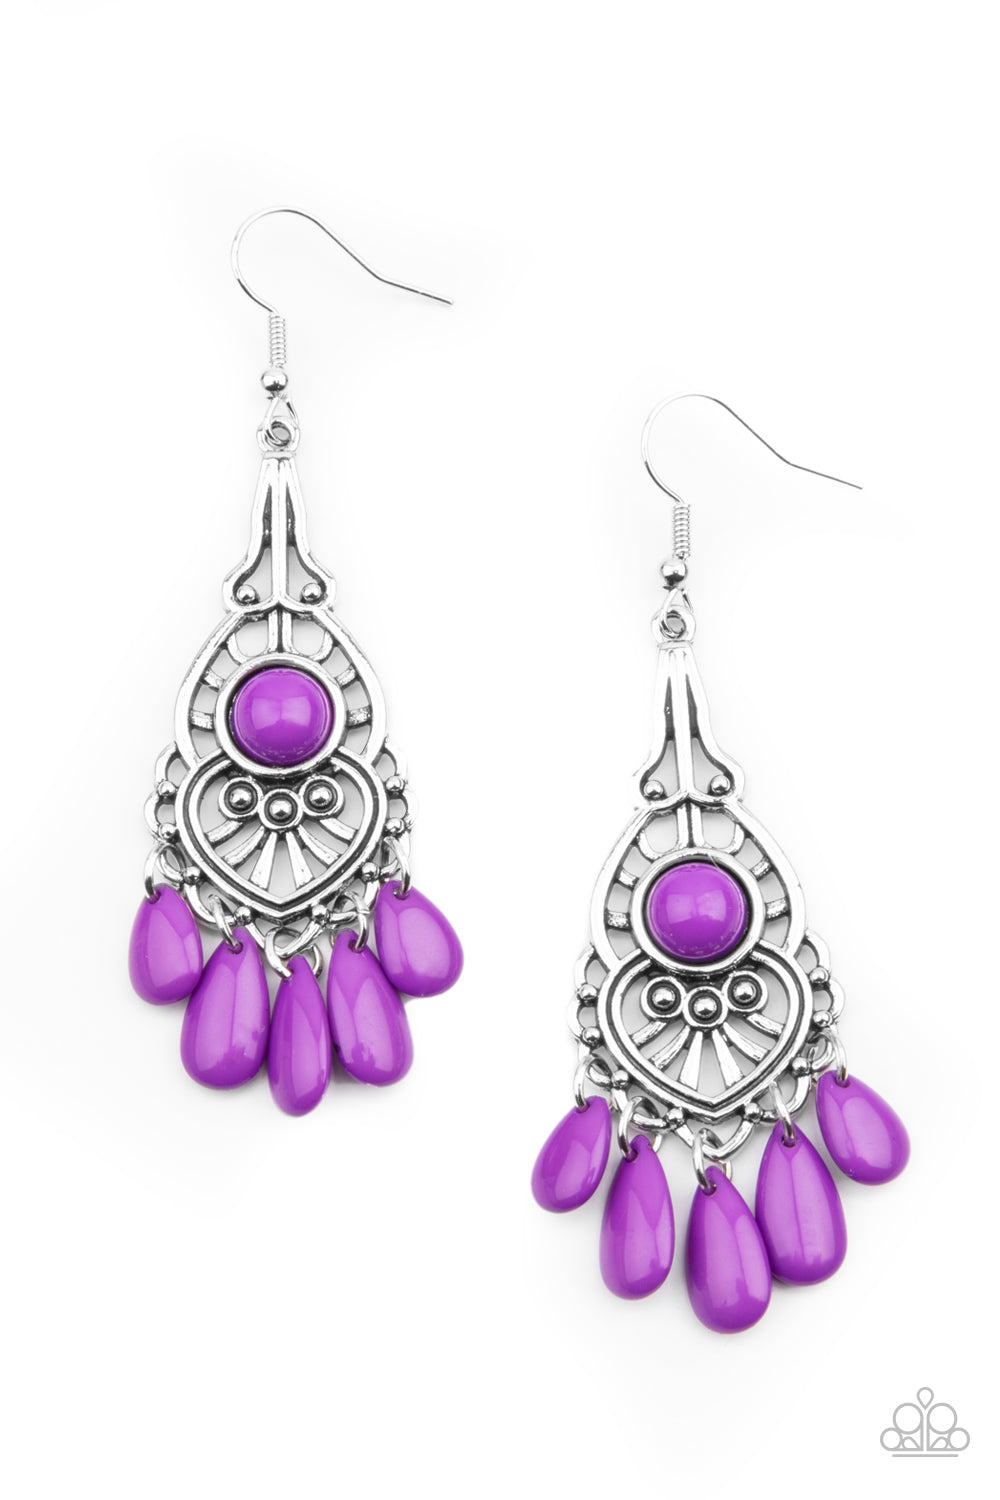 Vivacious purple teardrop beads swings from the bottom of an ornately studded silver frame featuring a bubbly purple beaded center for a fruity finish. Earring attaches to a standard fishhook fitting.